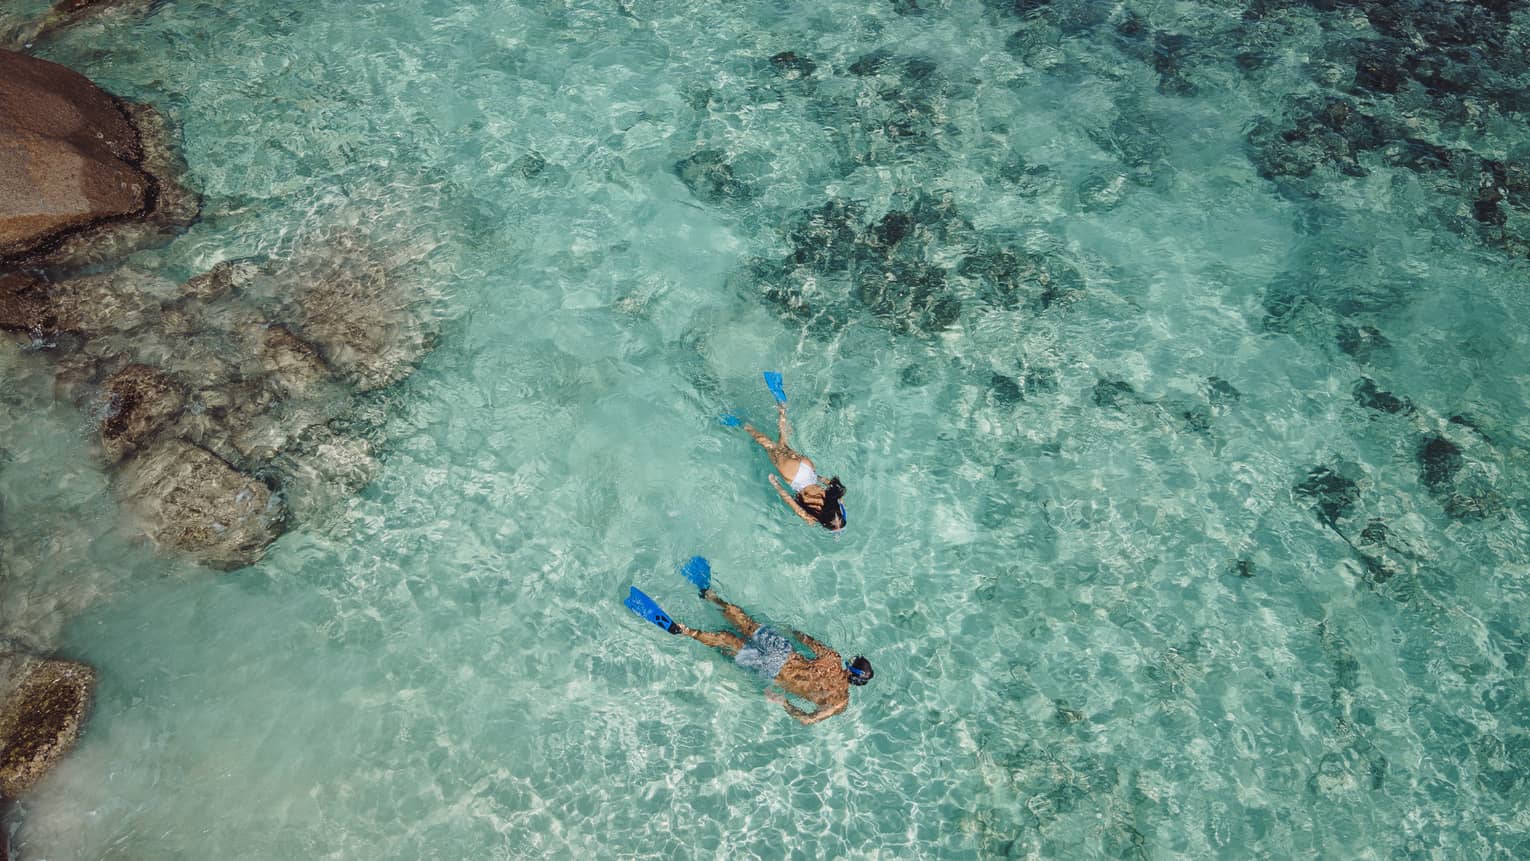 Aerial view of two snorkellers wearing blue flippers in an expanse of shallow, turquoise waters rippling over the reef.